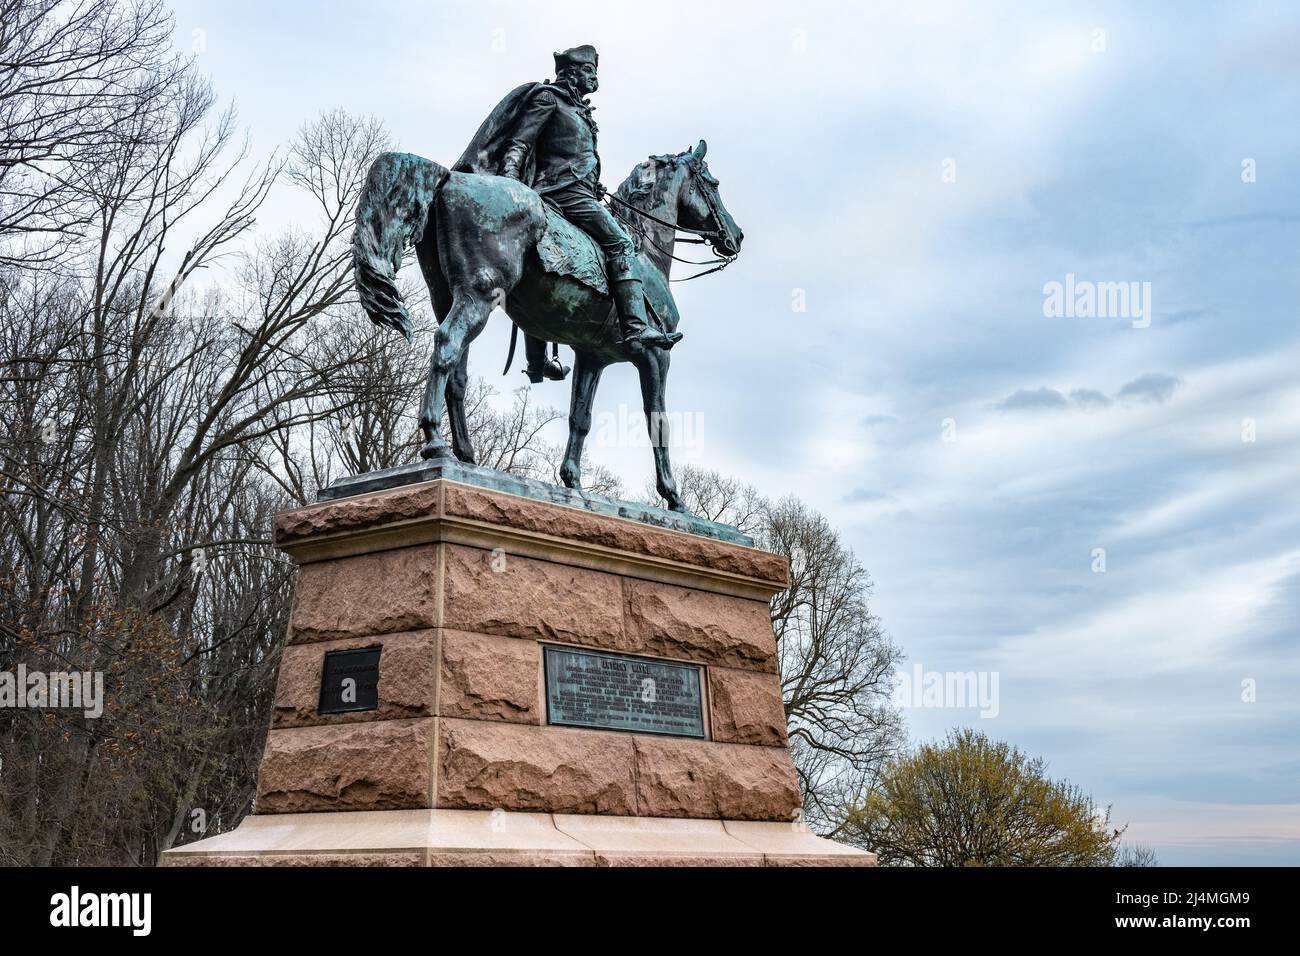 https://c8.alamy.com/comp/2J4MGM9/general-anthony-wayne-statue-at-valley-forge-national-historic-park-in-king-of-prussia-pennsylvania-usa-2J4MGM9.jpg